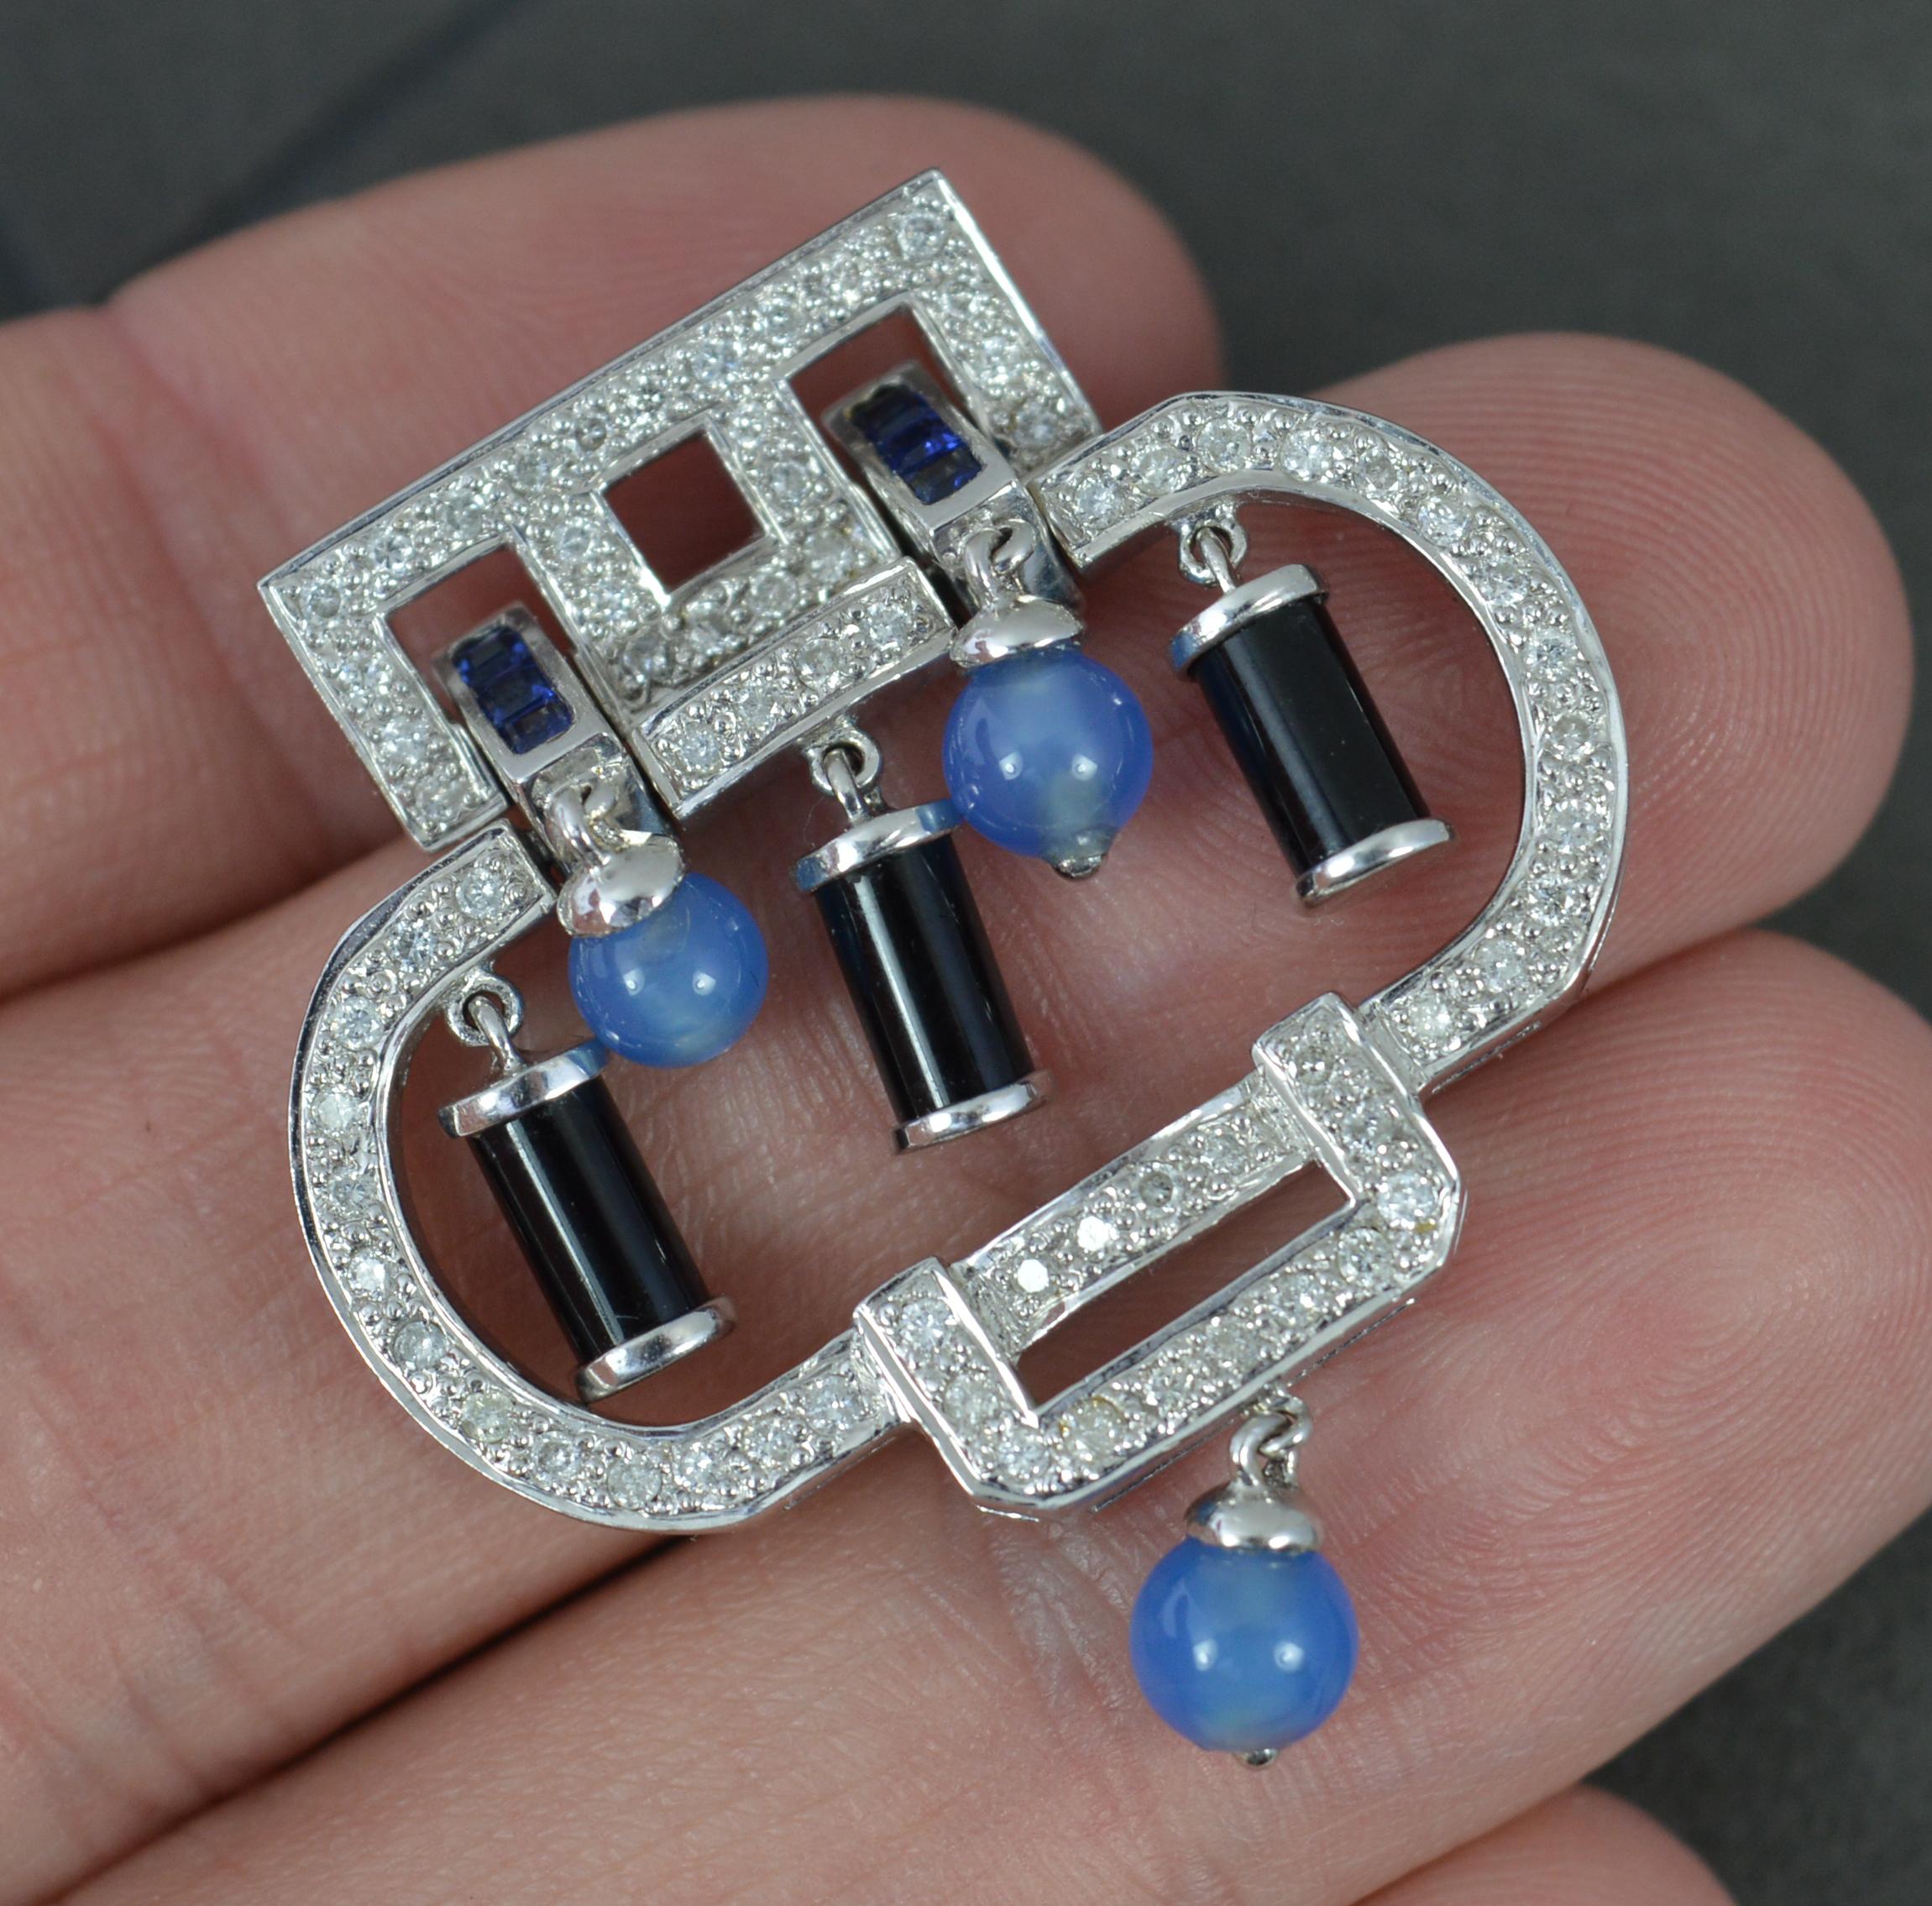 A stunning contemporary pendant.
Solid 18 carat white gold example.
Designed with many round brilliant cut diamonds encrusted into the piece throughout, approx 0.75cts. Set with an additional six princess cut blue sapphires. To the centre are five